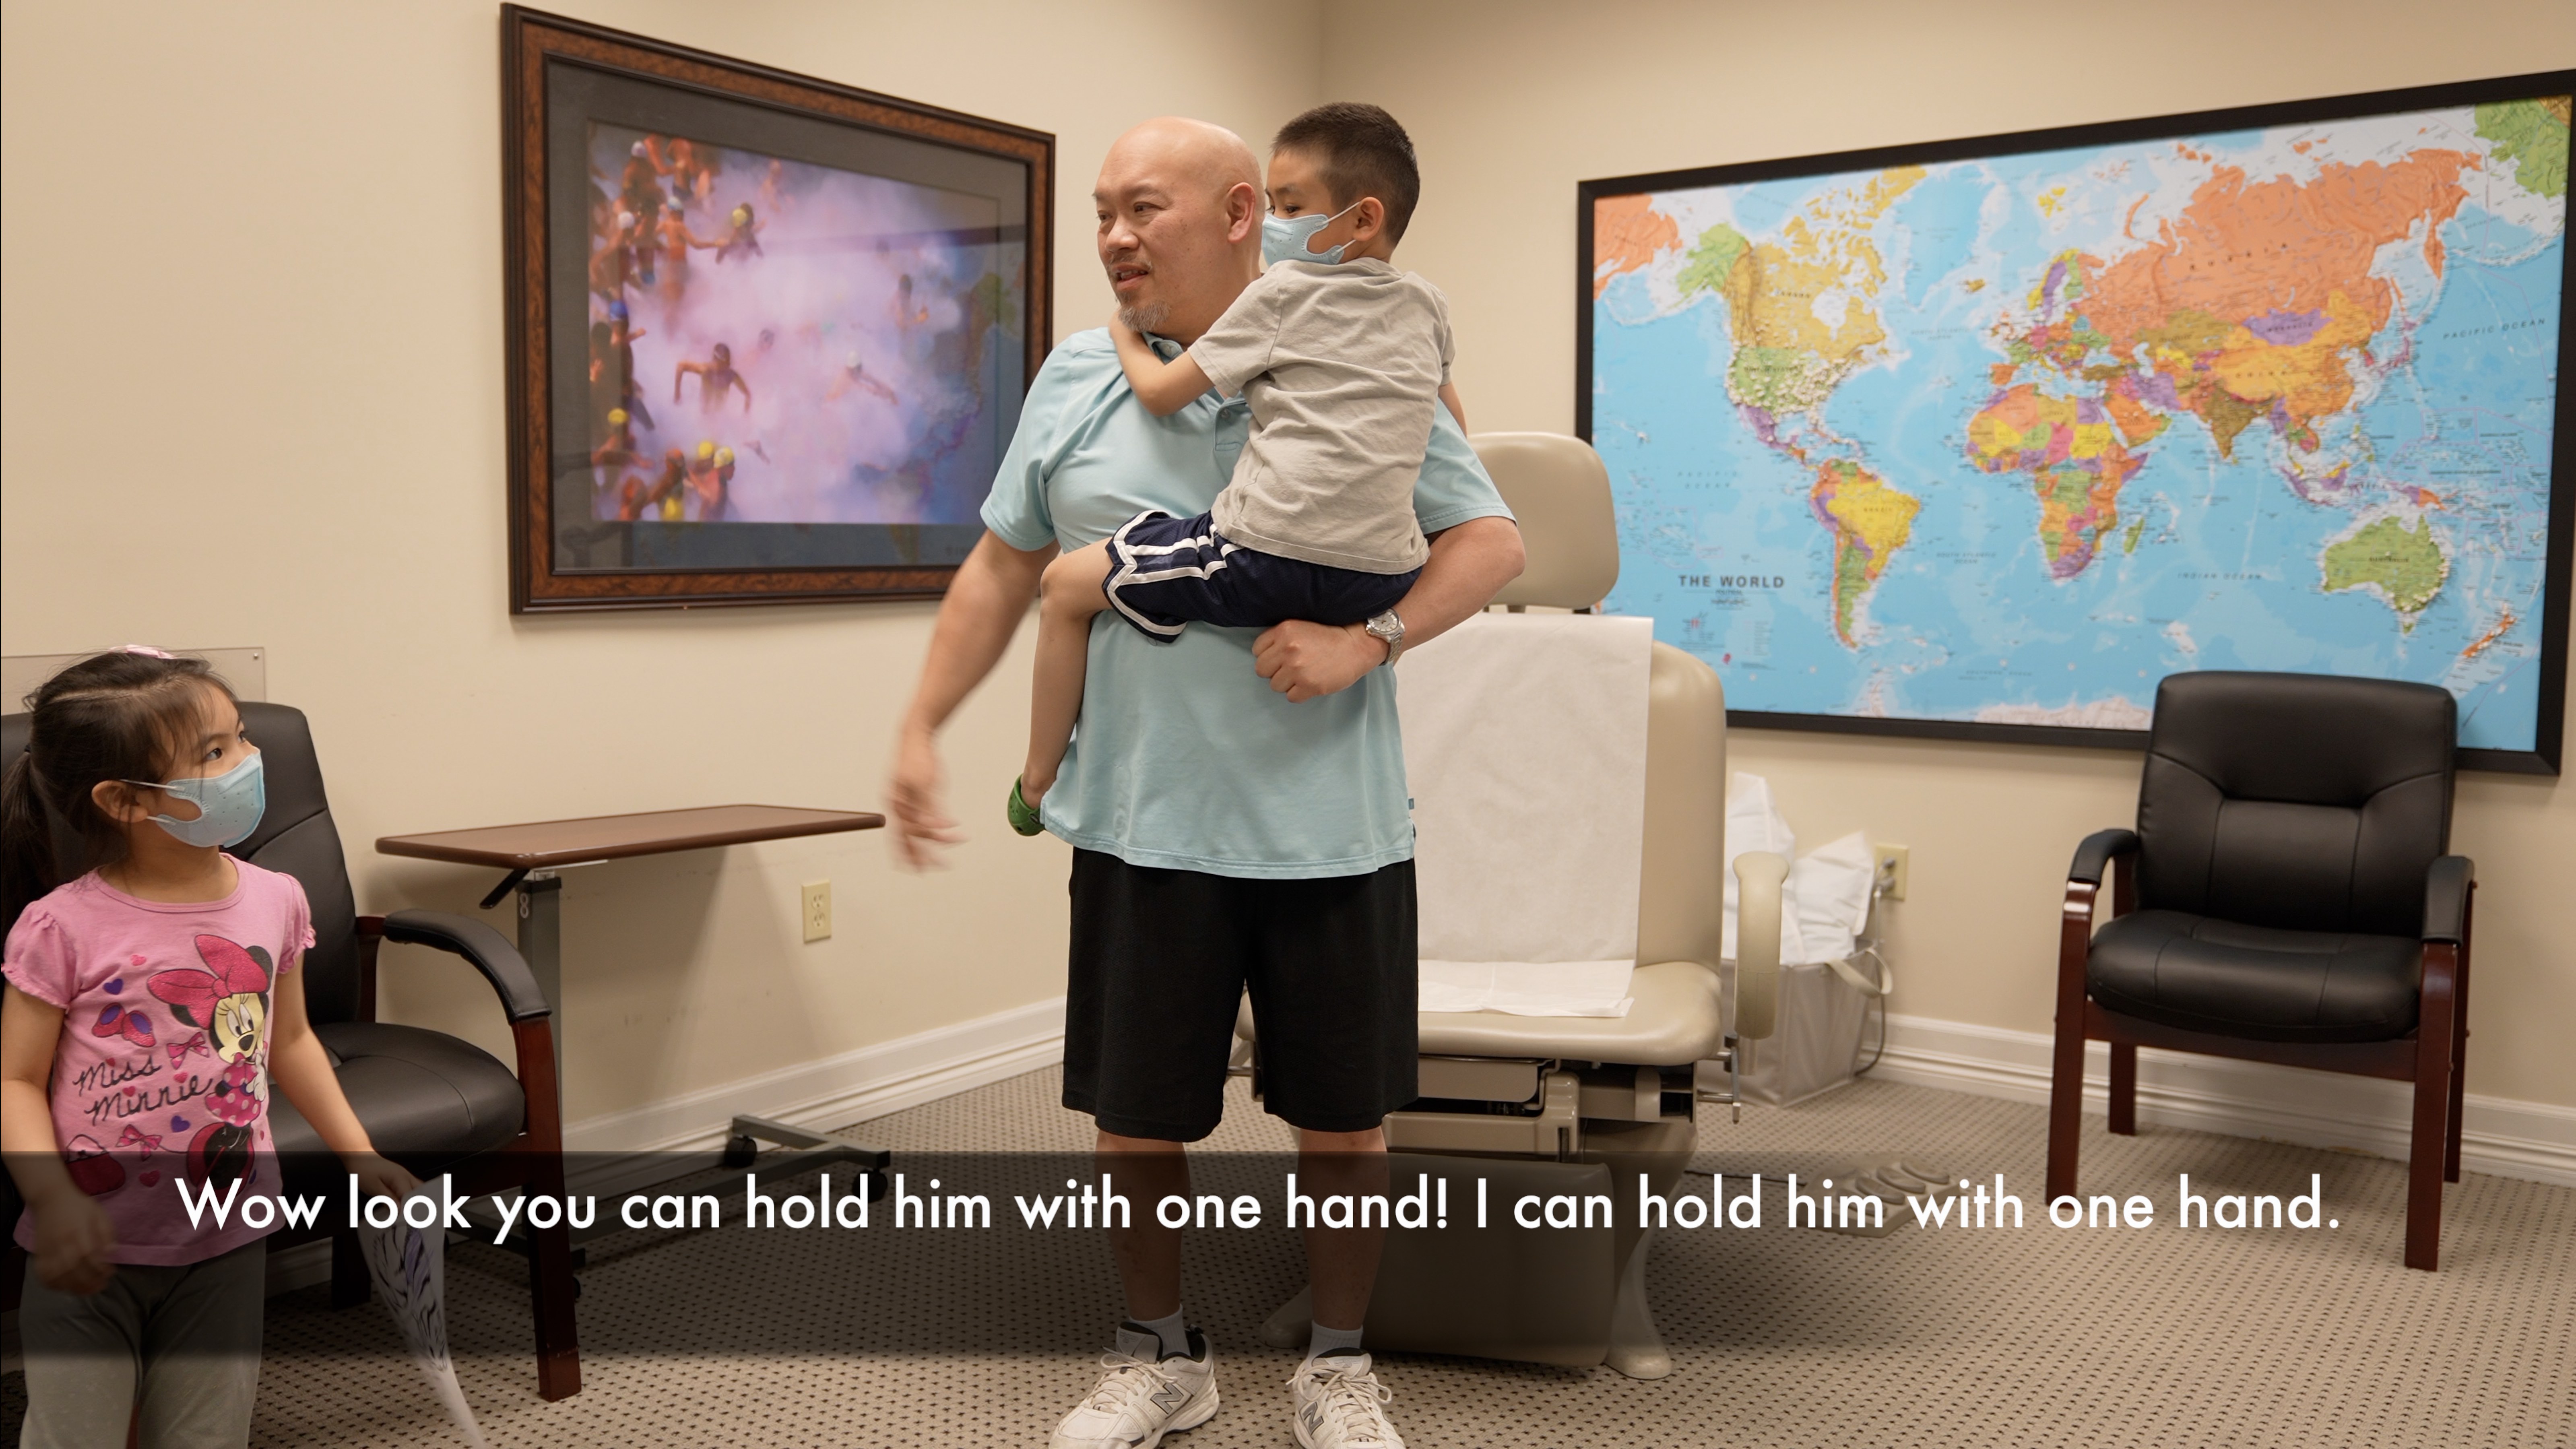 Wow look you can hold him with one hand! After treatment by Edward Tobinick, M.D.